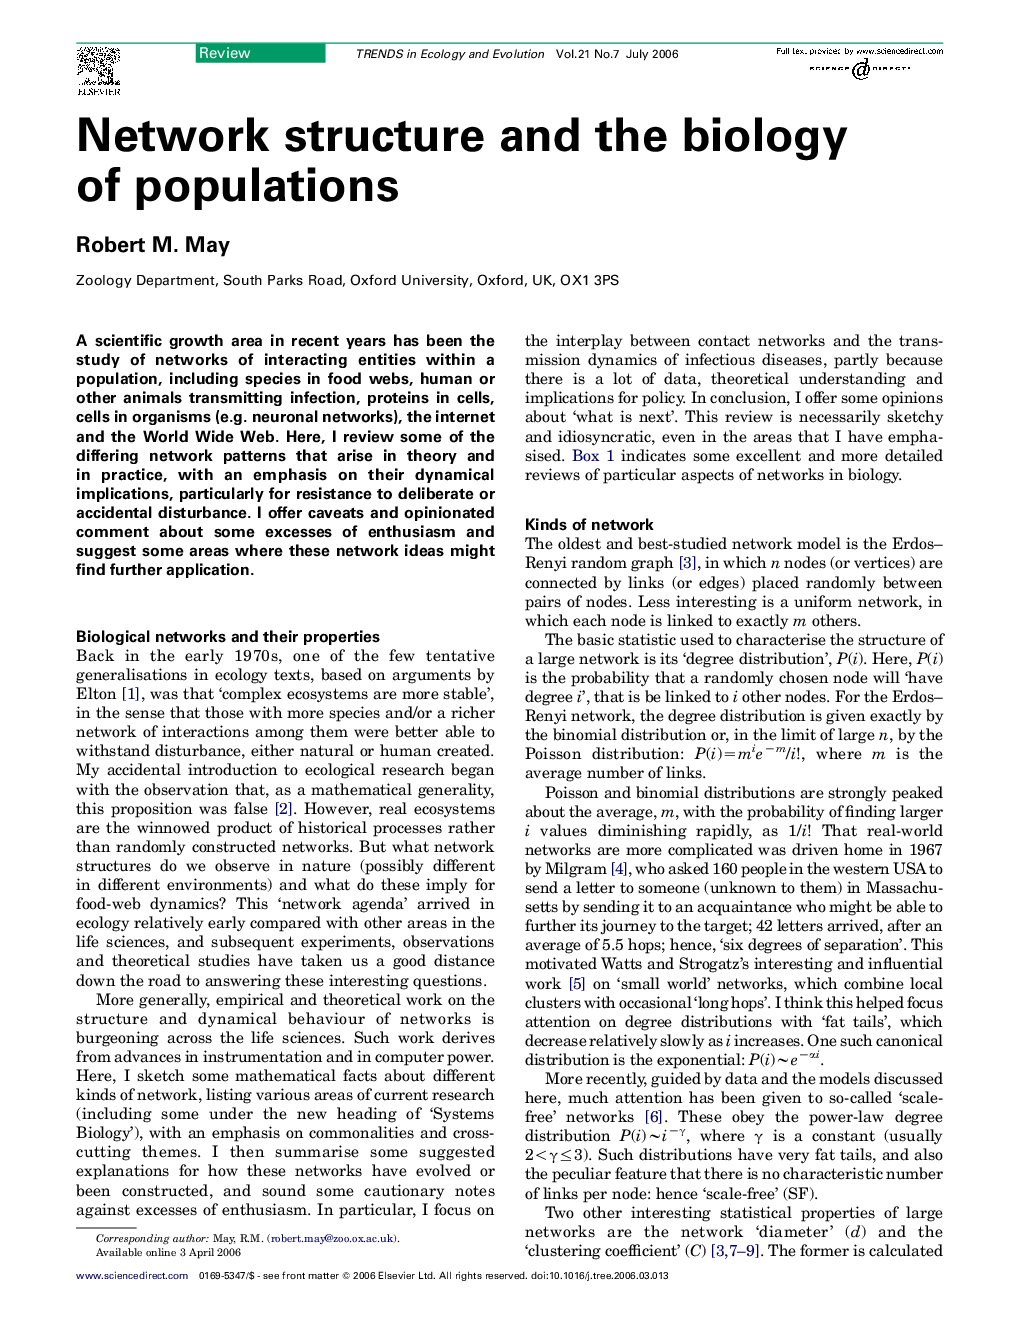 Network structure and the biology of populations